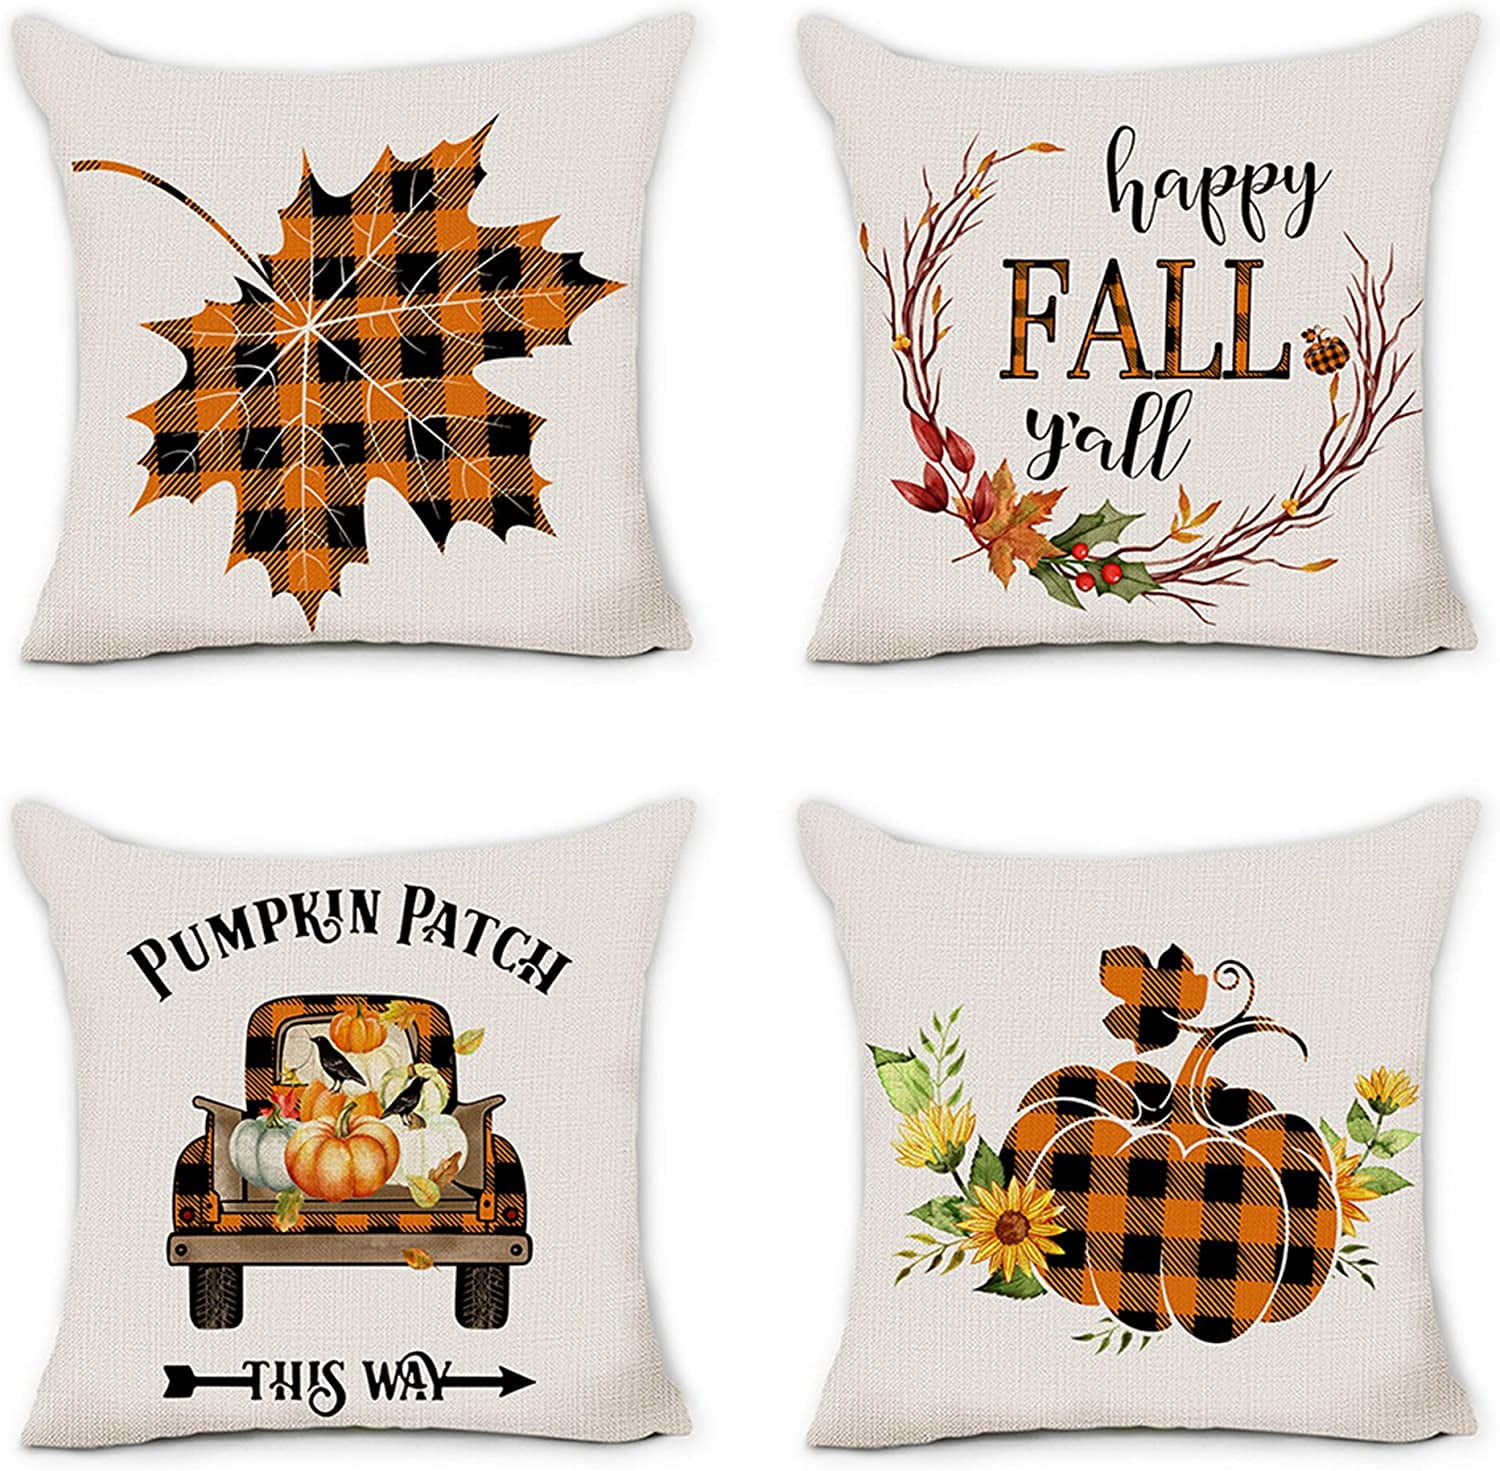 Decorative Pillow Country Farm Embroidered Pillow Cover Fall Harvest Buffalo Plaid Zipper Pillow Case Indoor Outdoor Pillow Covering